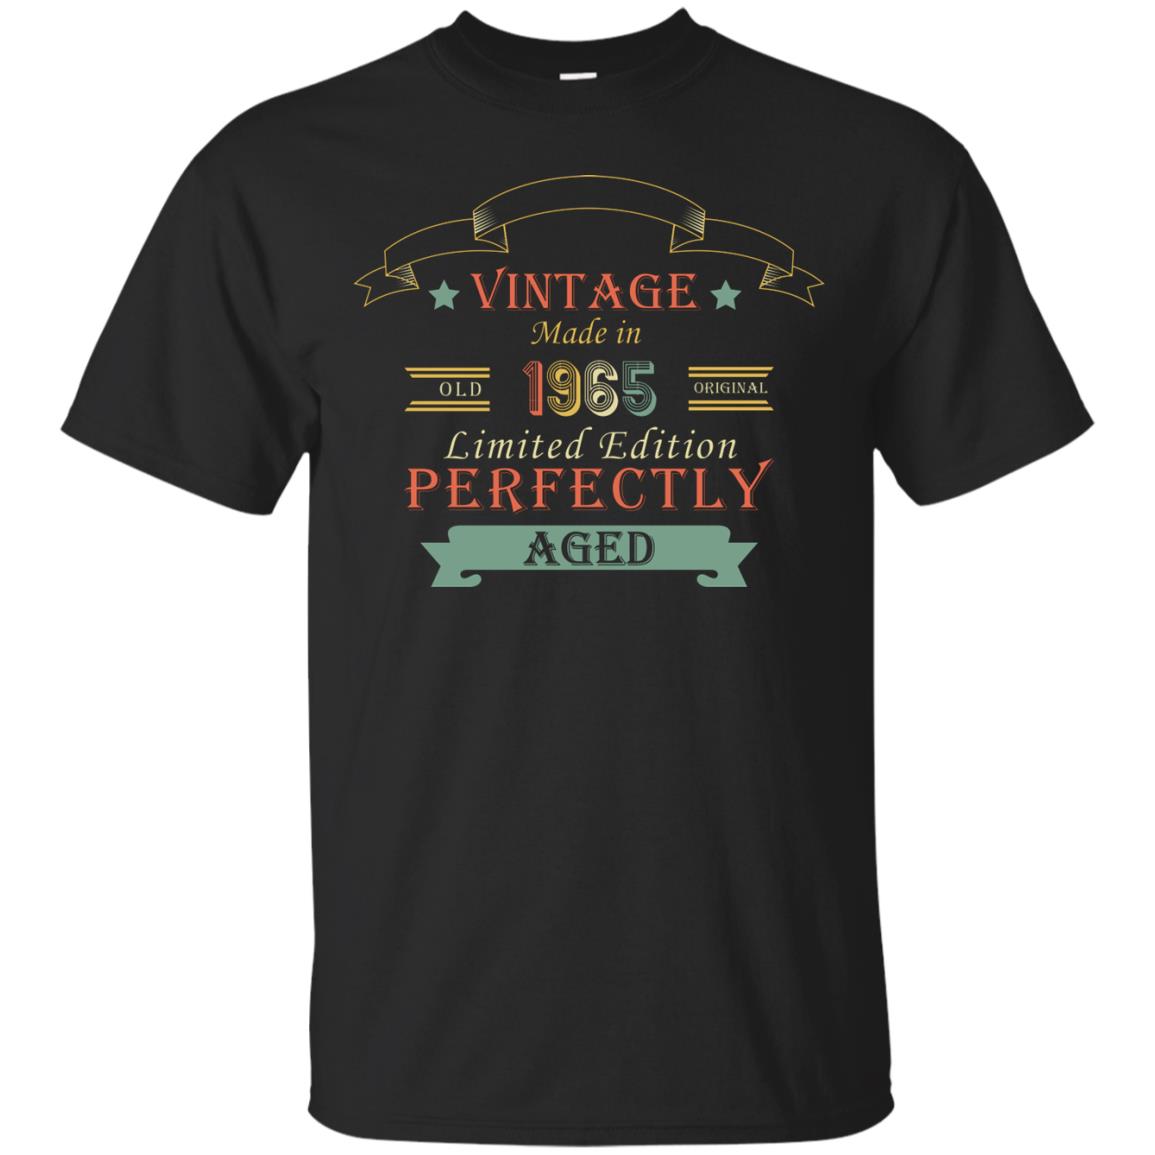 Vintage Made In Old 1965 Original Limited Edition Perfectly Aged 53th Birthday T-shirtG200 Gildan Ultra Cotton T-Shirt